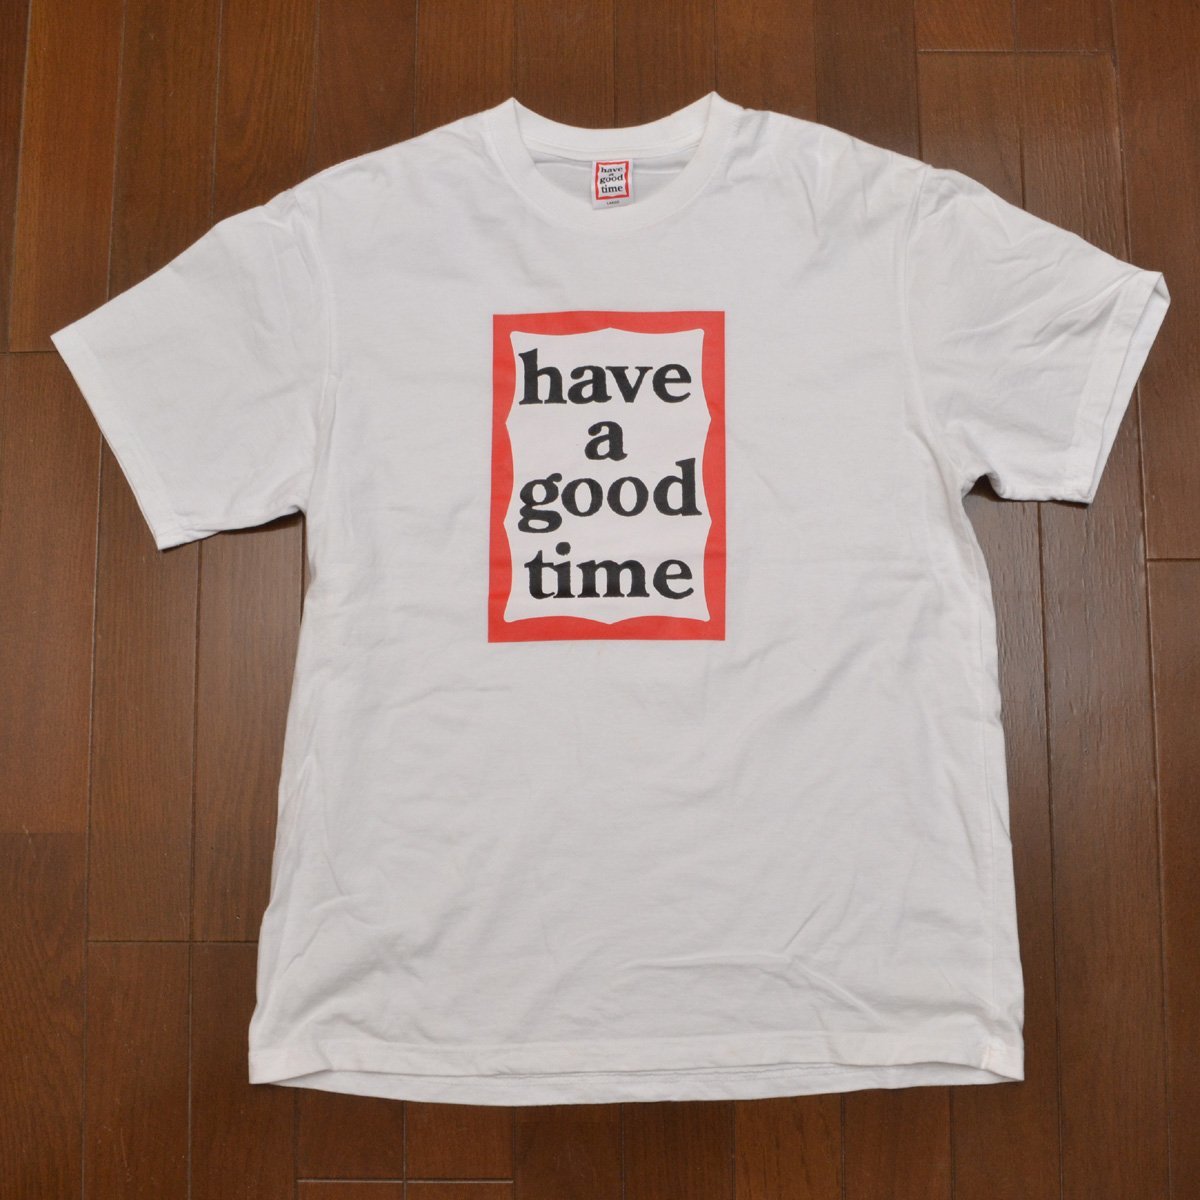 Yahoo!オークション -「have a good time」(Tシャツ) (メンズ 